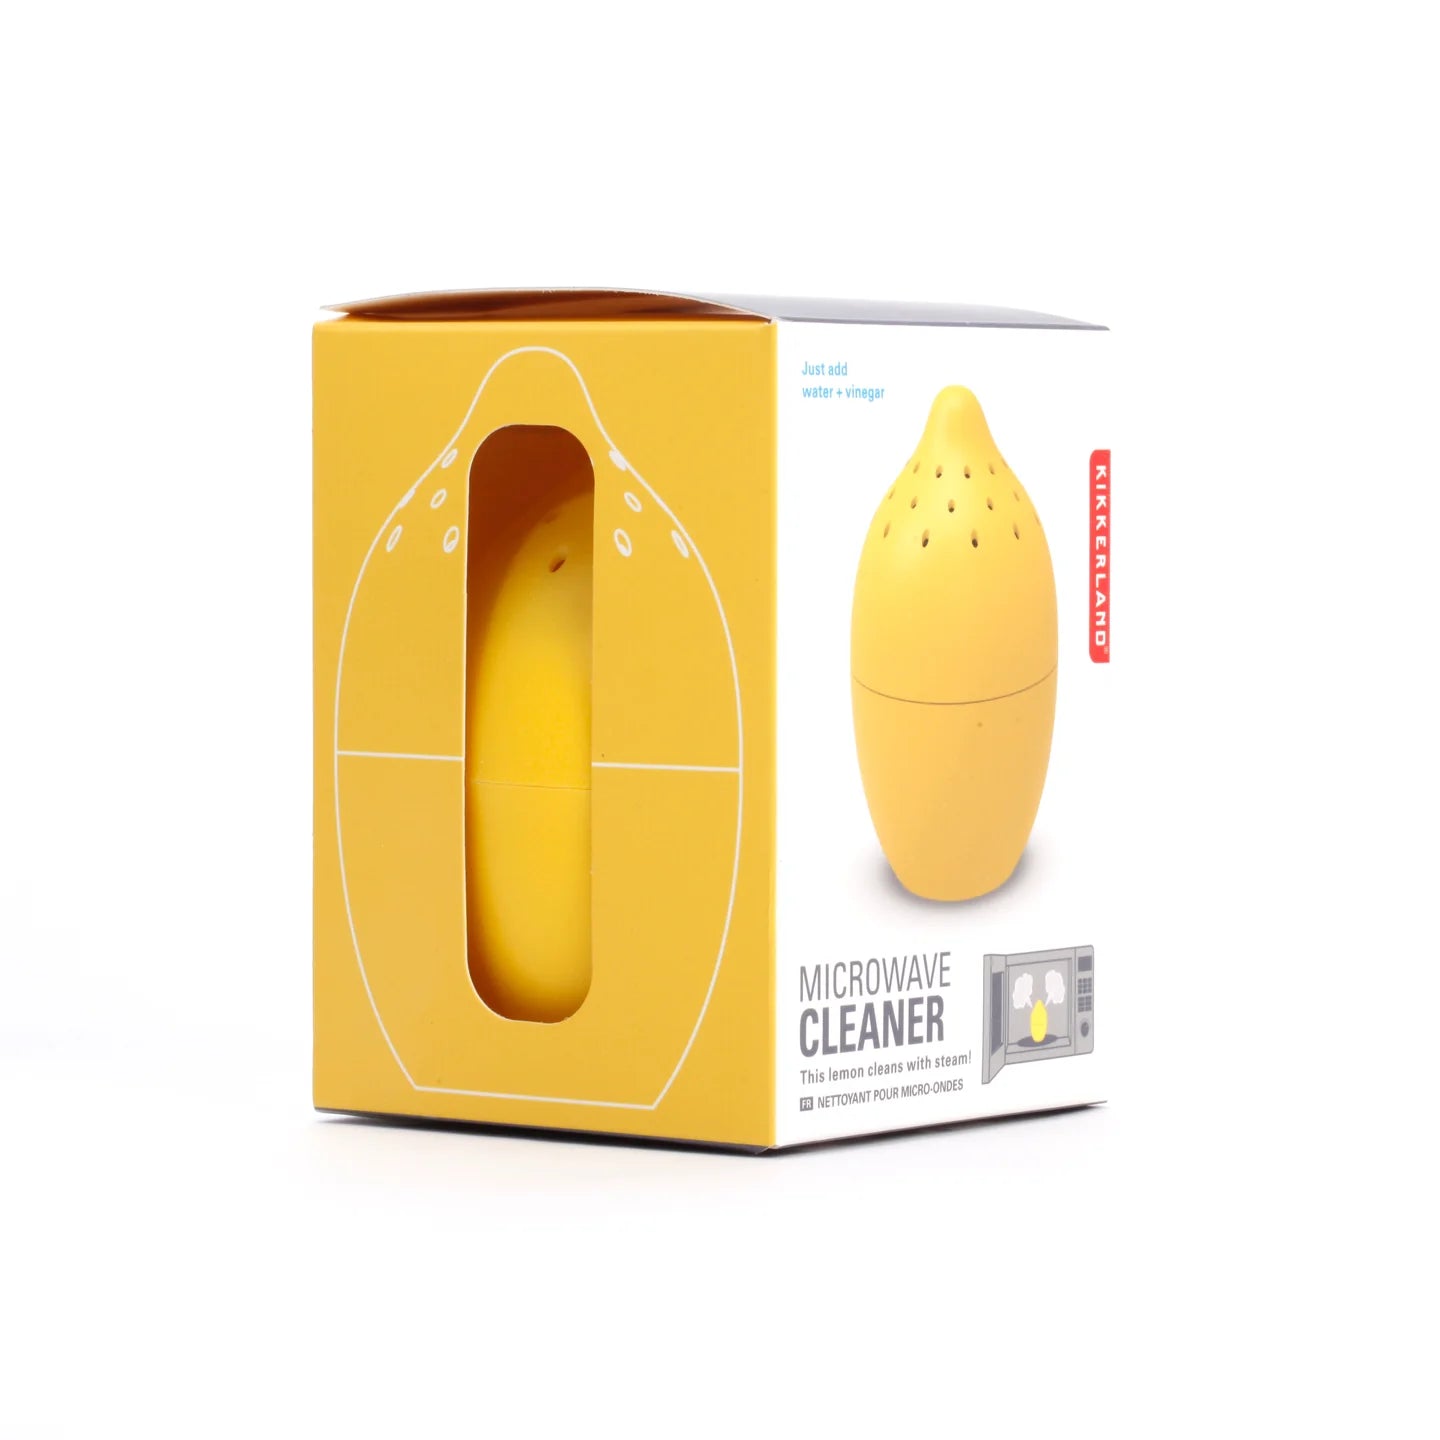 Fab Gifts | Kikkerland Lemon Microwave Cleaner by Weirs of Baggot Street